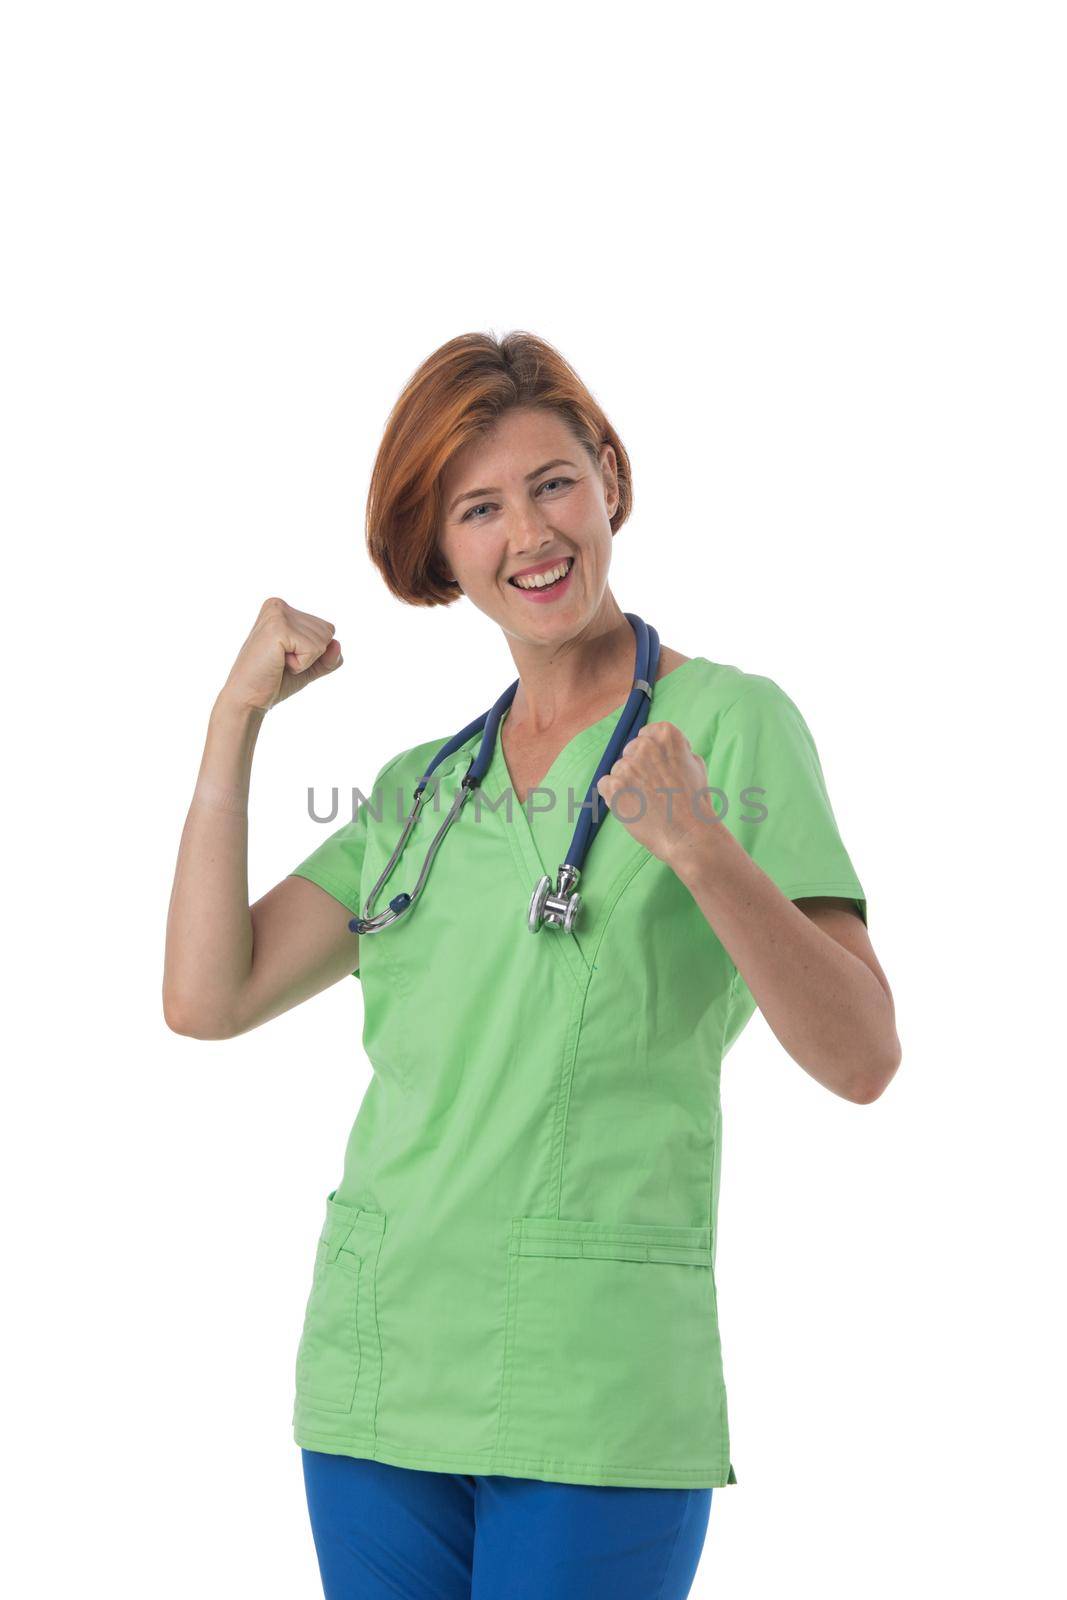 Nurse isolated on white. Female medical professional doctor standing holding fisis